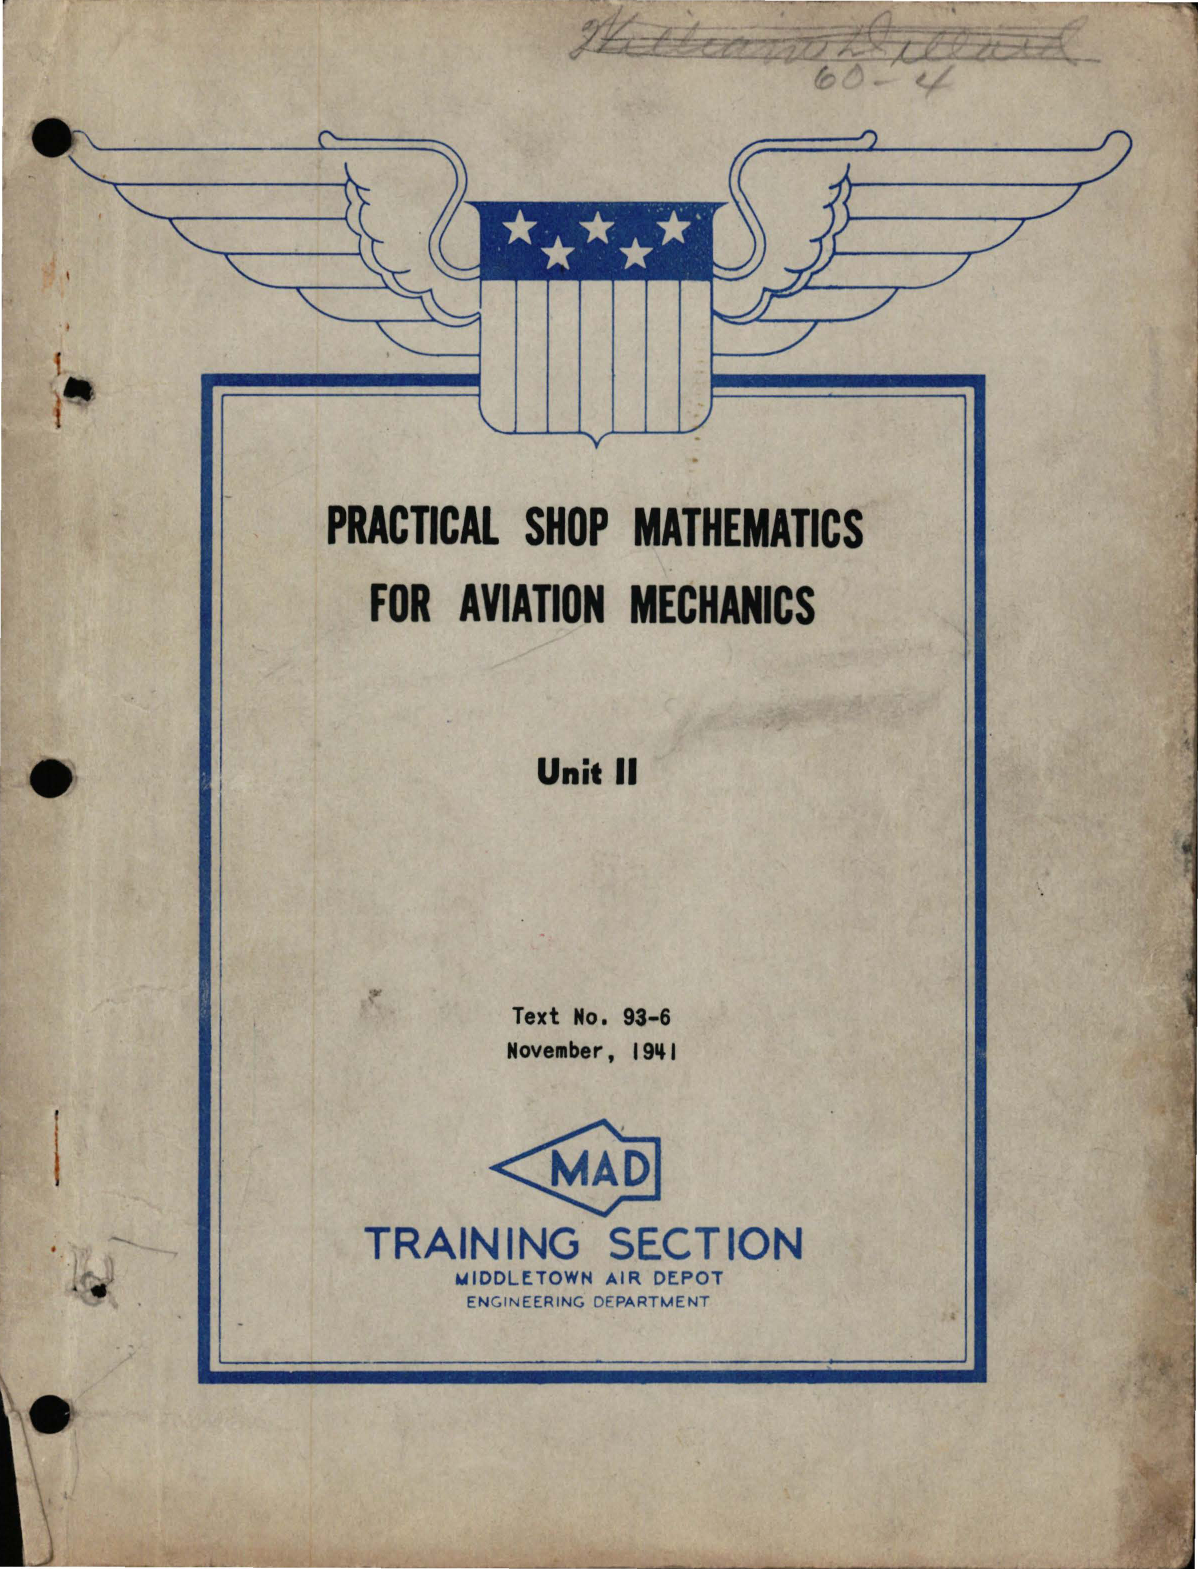 Sample page 1 from AirCorps Library document: Practical Shop Mathematics for Aviation Mechanics Unit II